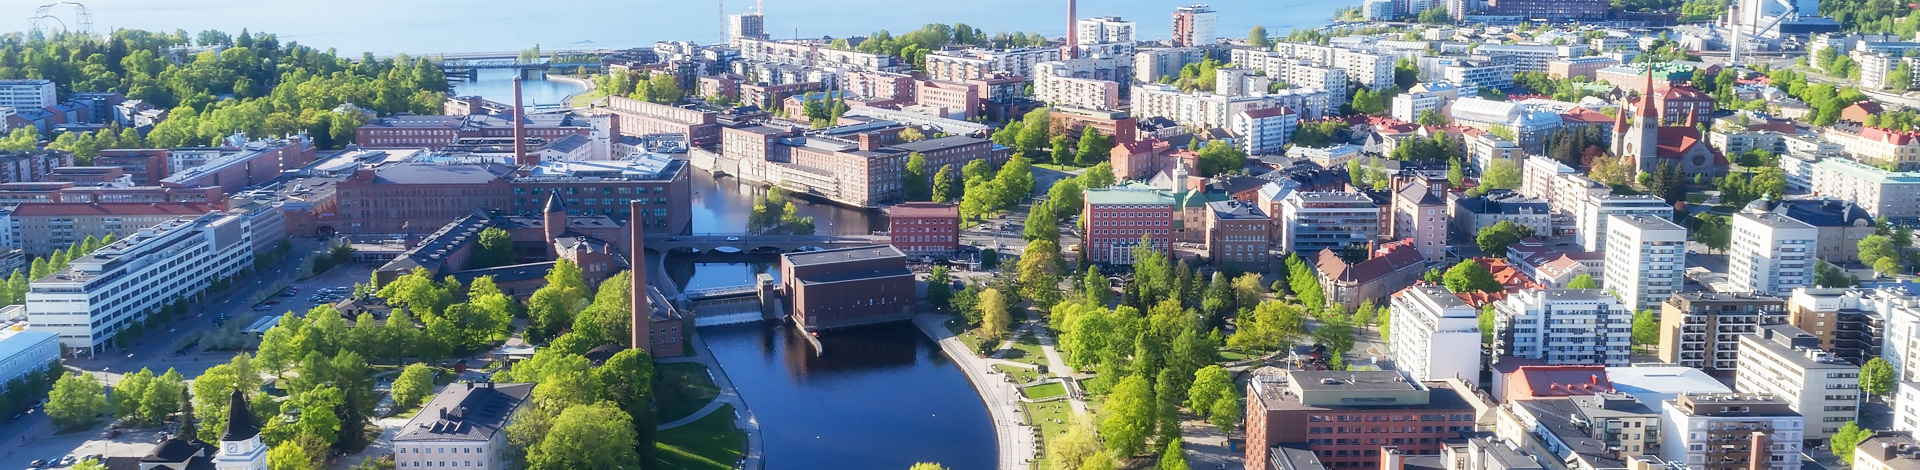 View of Tampere